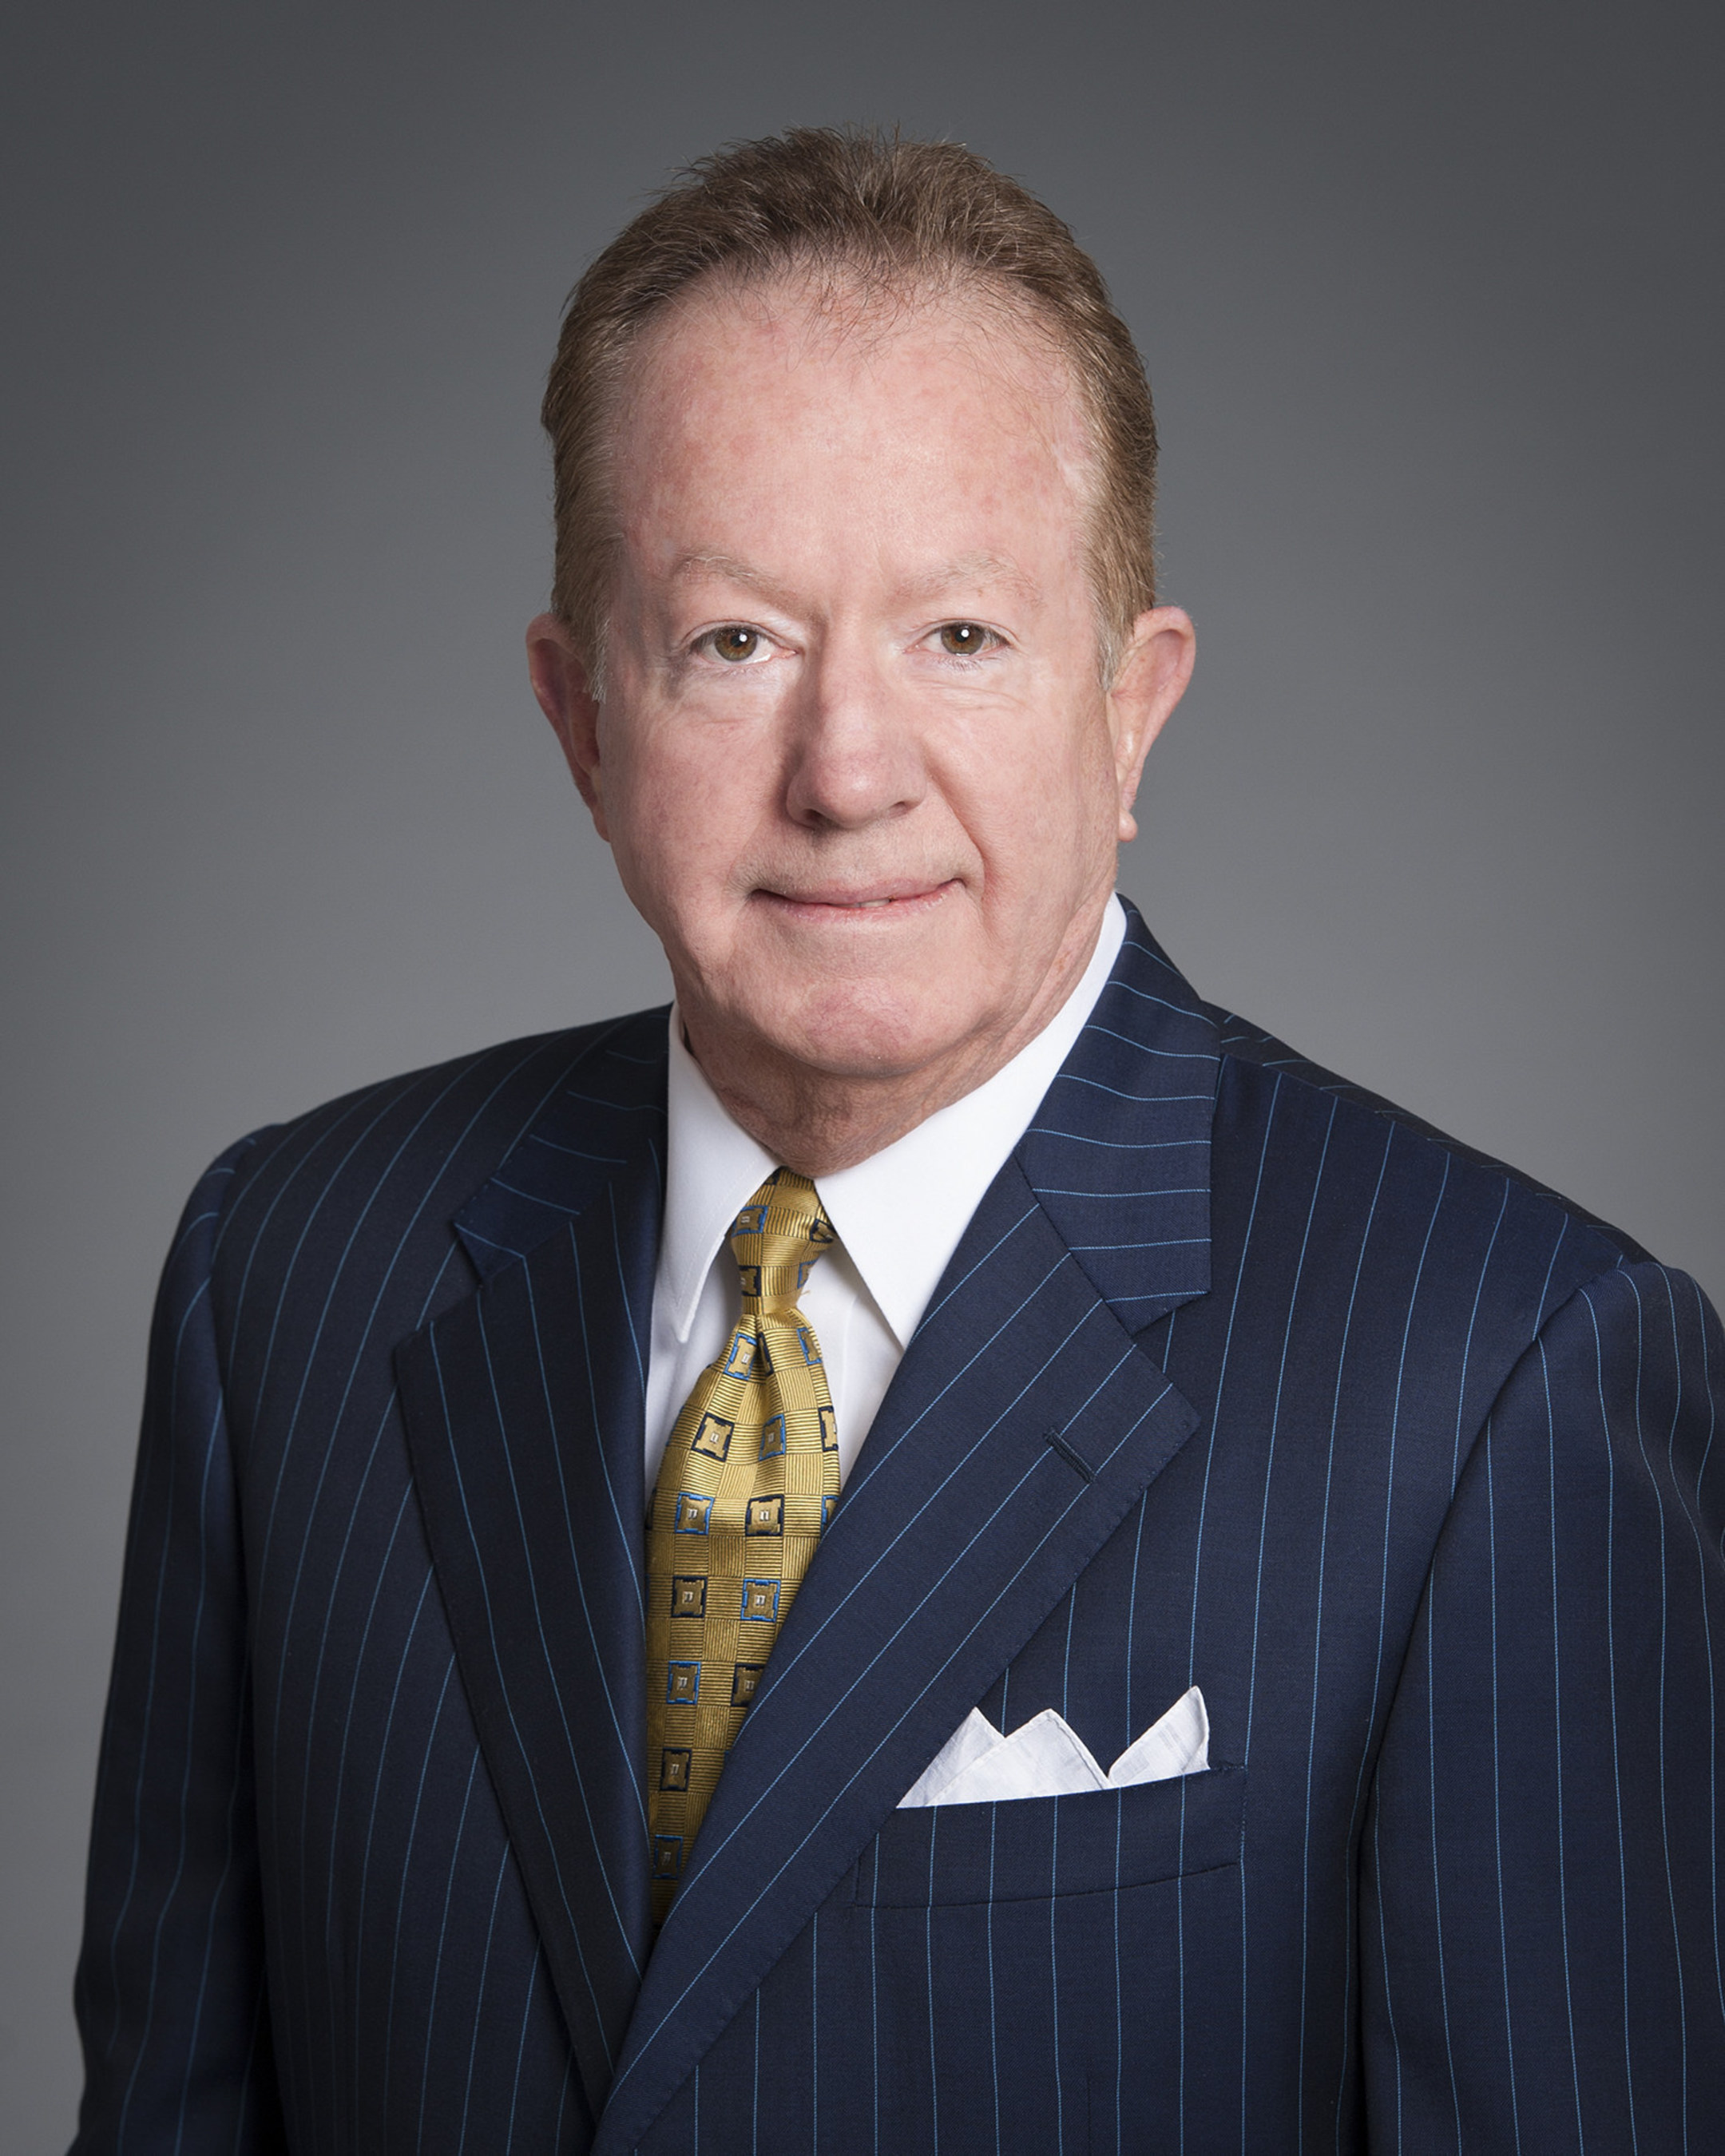 Richard P. Rojeck, CFP?, 2015 Chair of the Board of Directors for Certified Financial Planner Board of Standards, Inc.